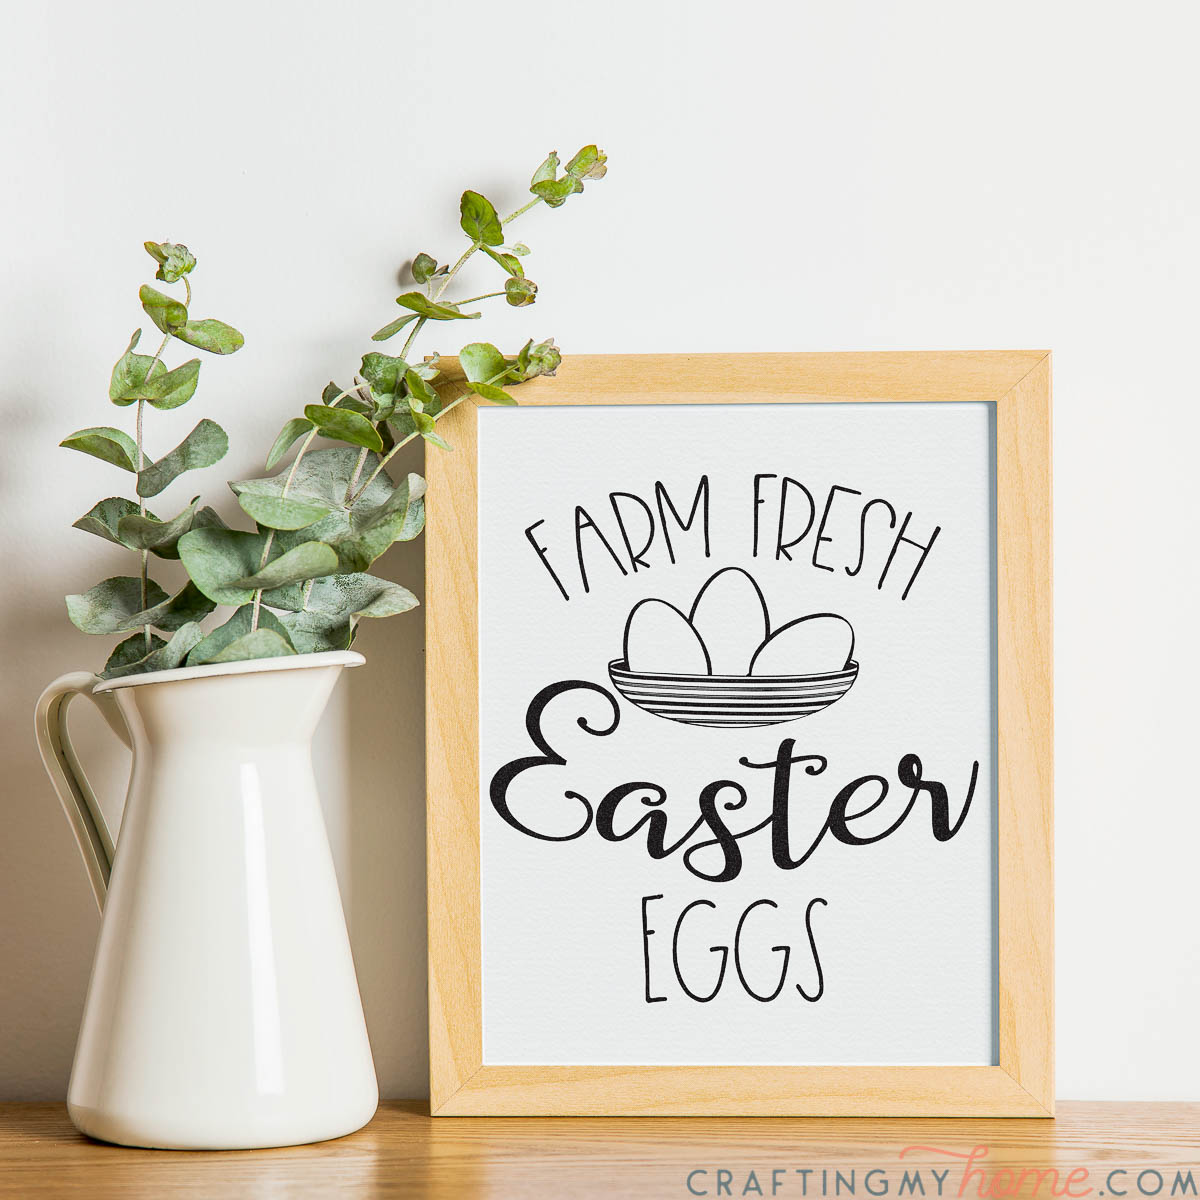 White pitcher with eucalyptus leaves in it next to a natural wood framed beautiful printable Easter sign.